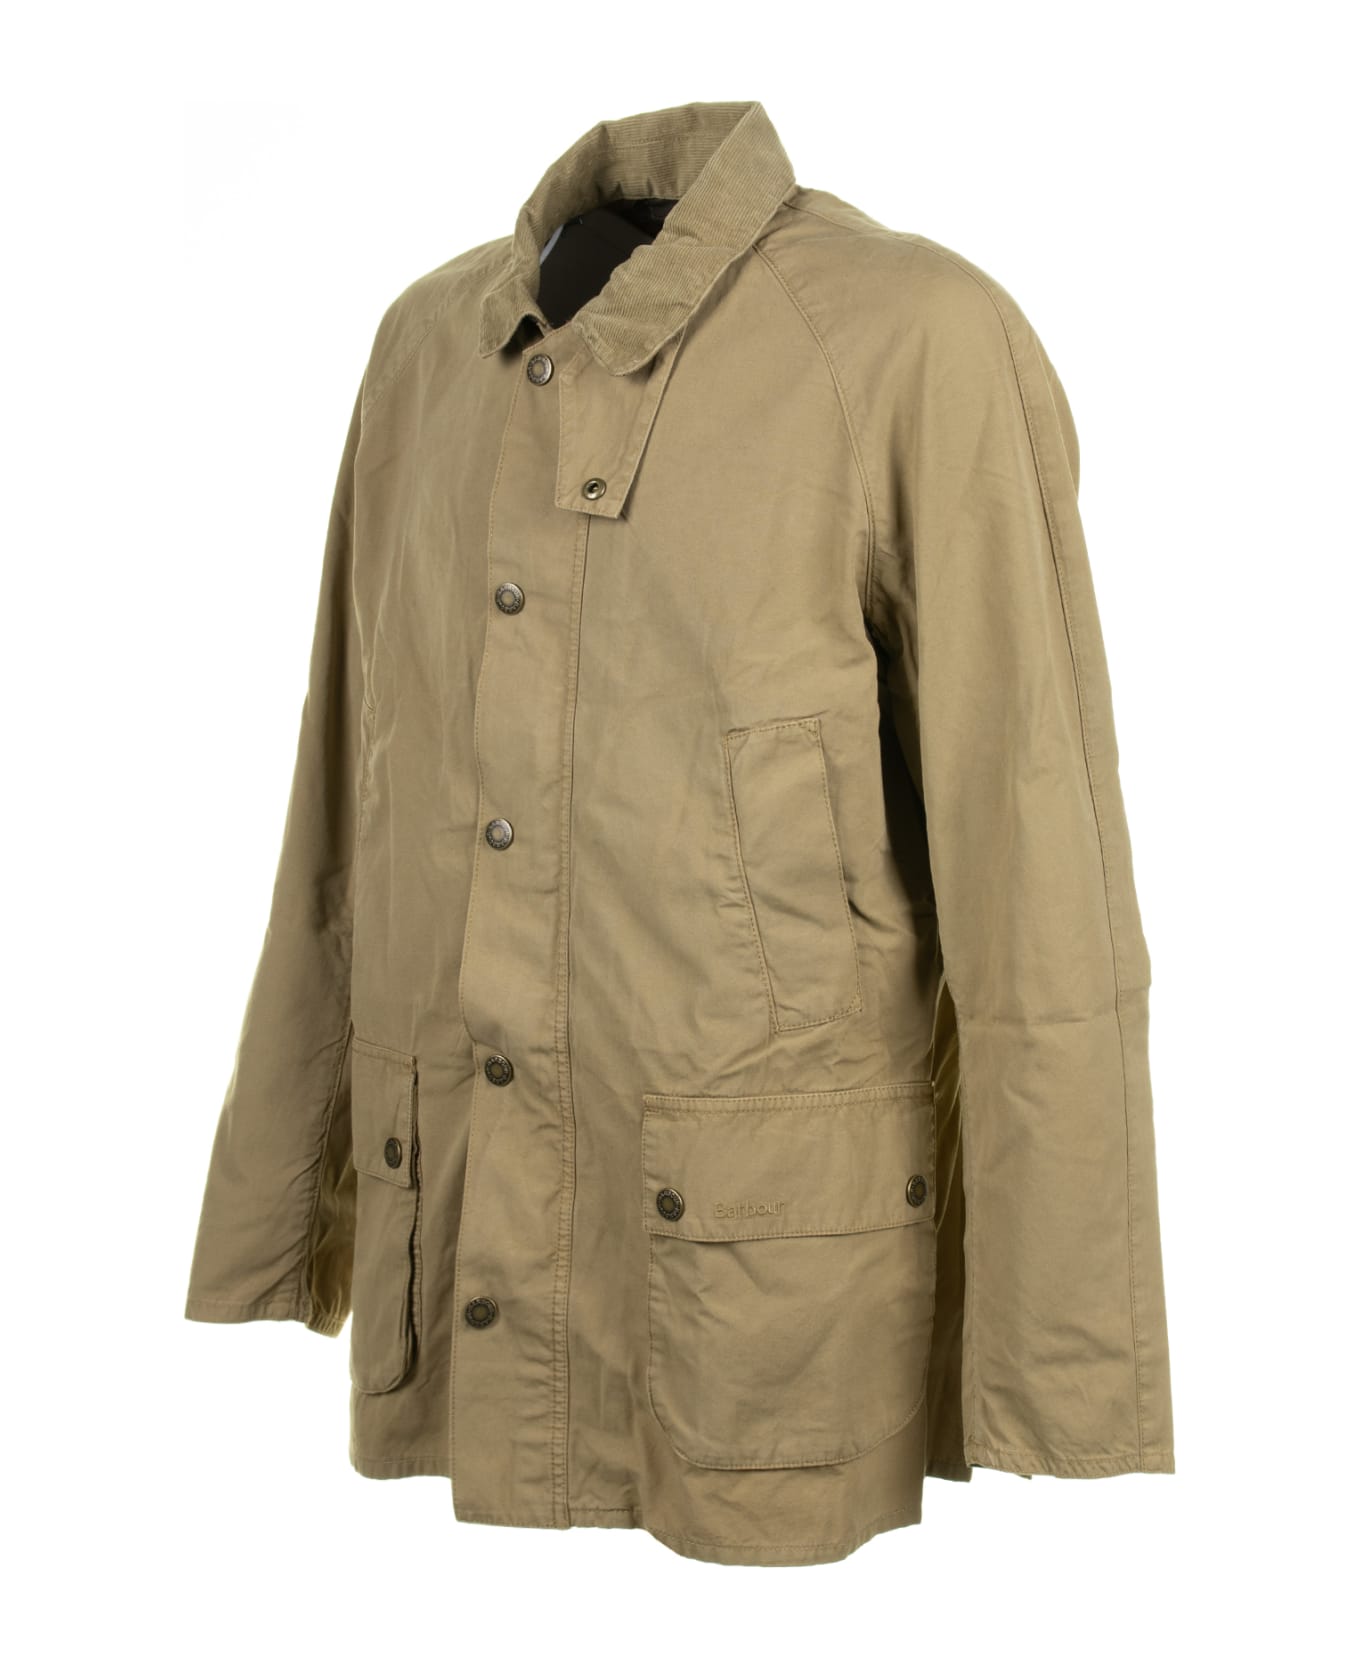 Barbour Cotton Jacket With Pockets And Buttons - STONE ジャケット